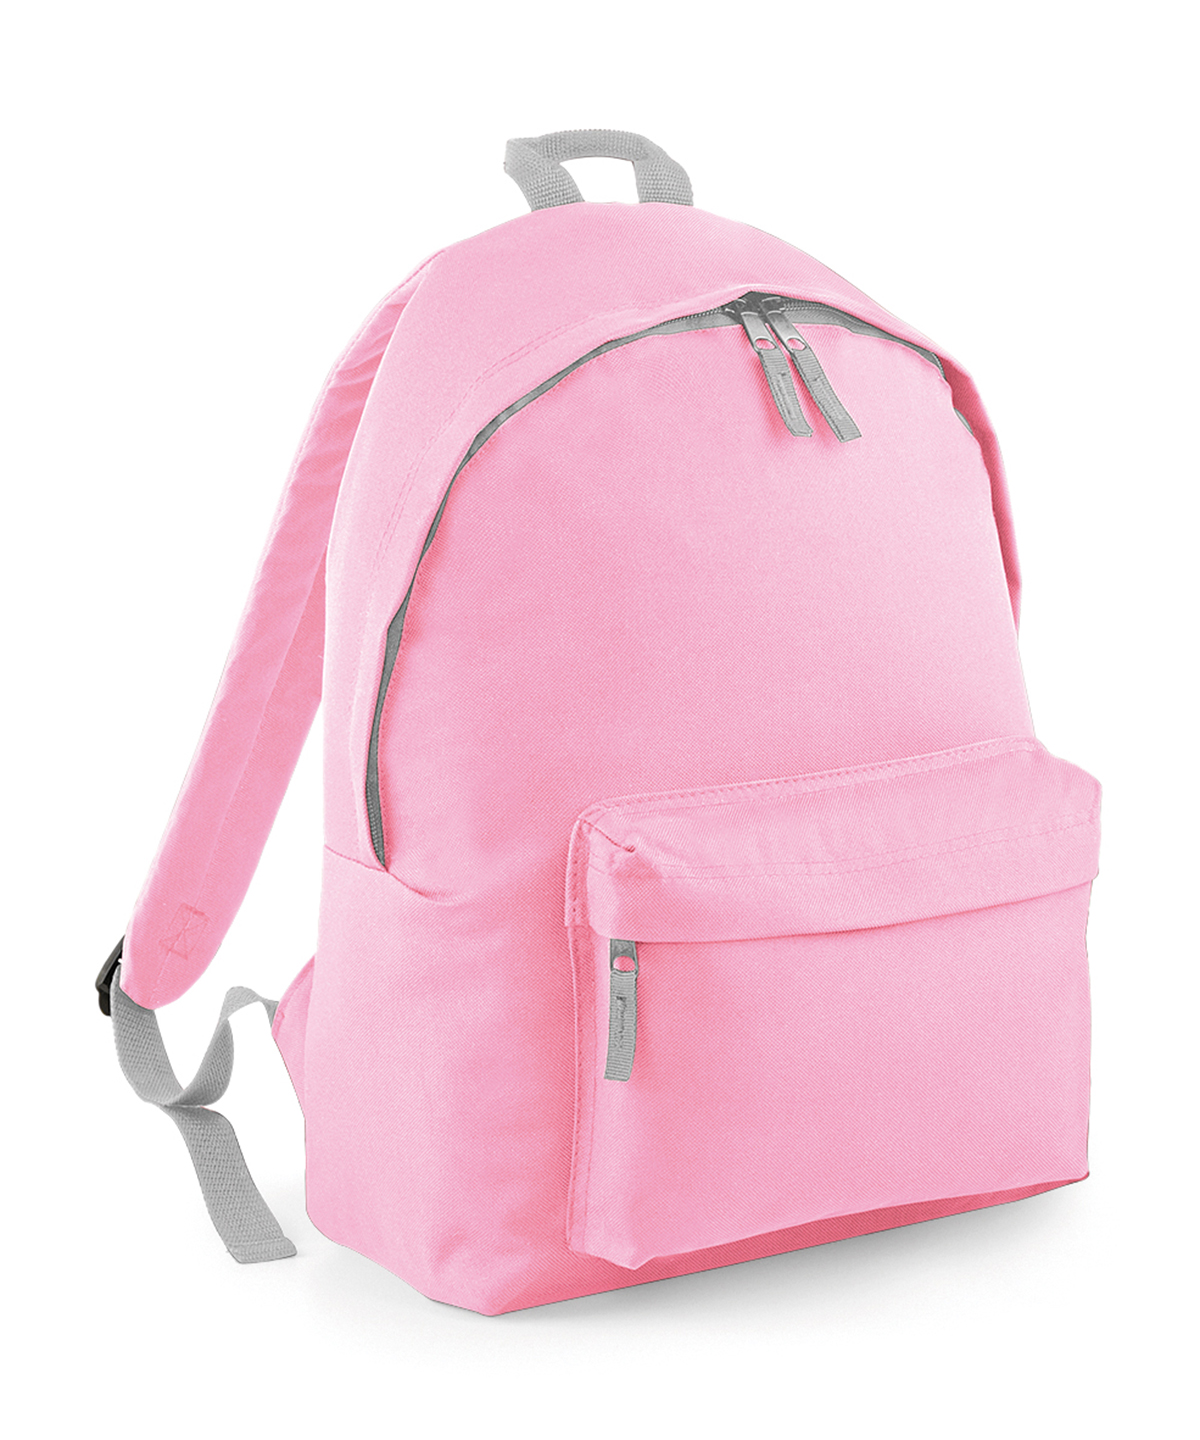 Junior Fashion Backpack Classic Pink/Light Grey Size One Size